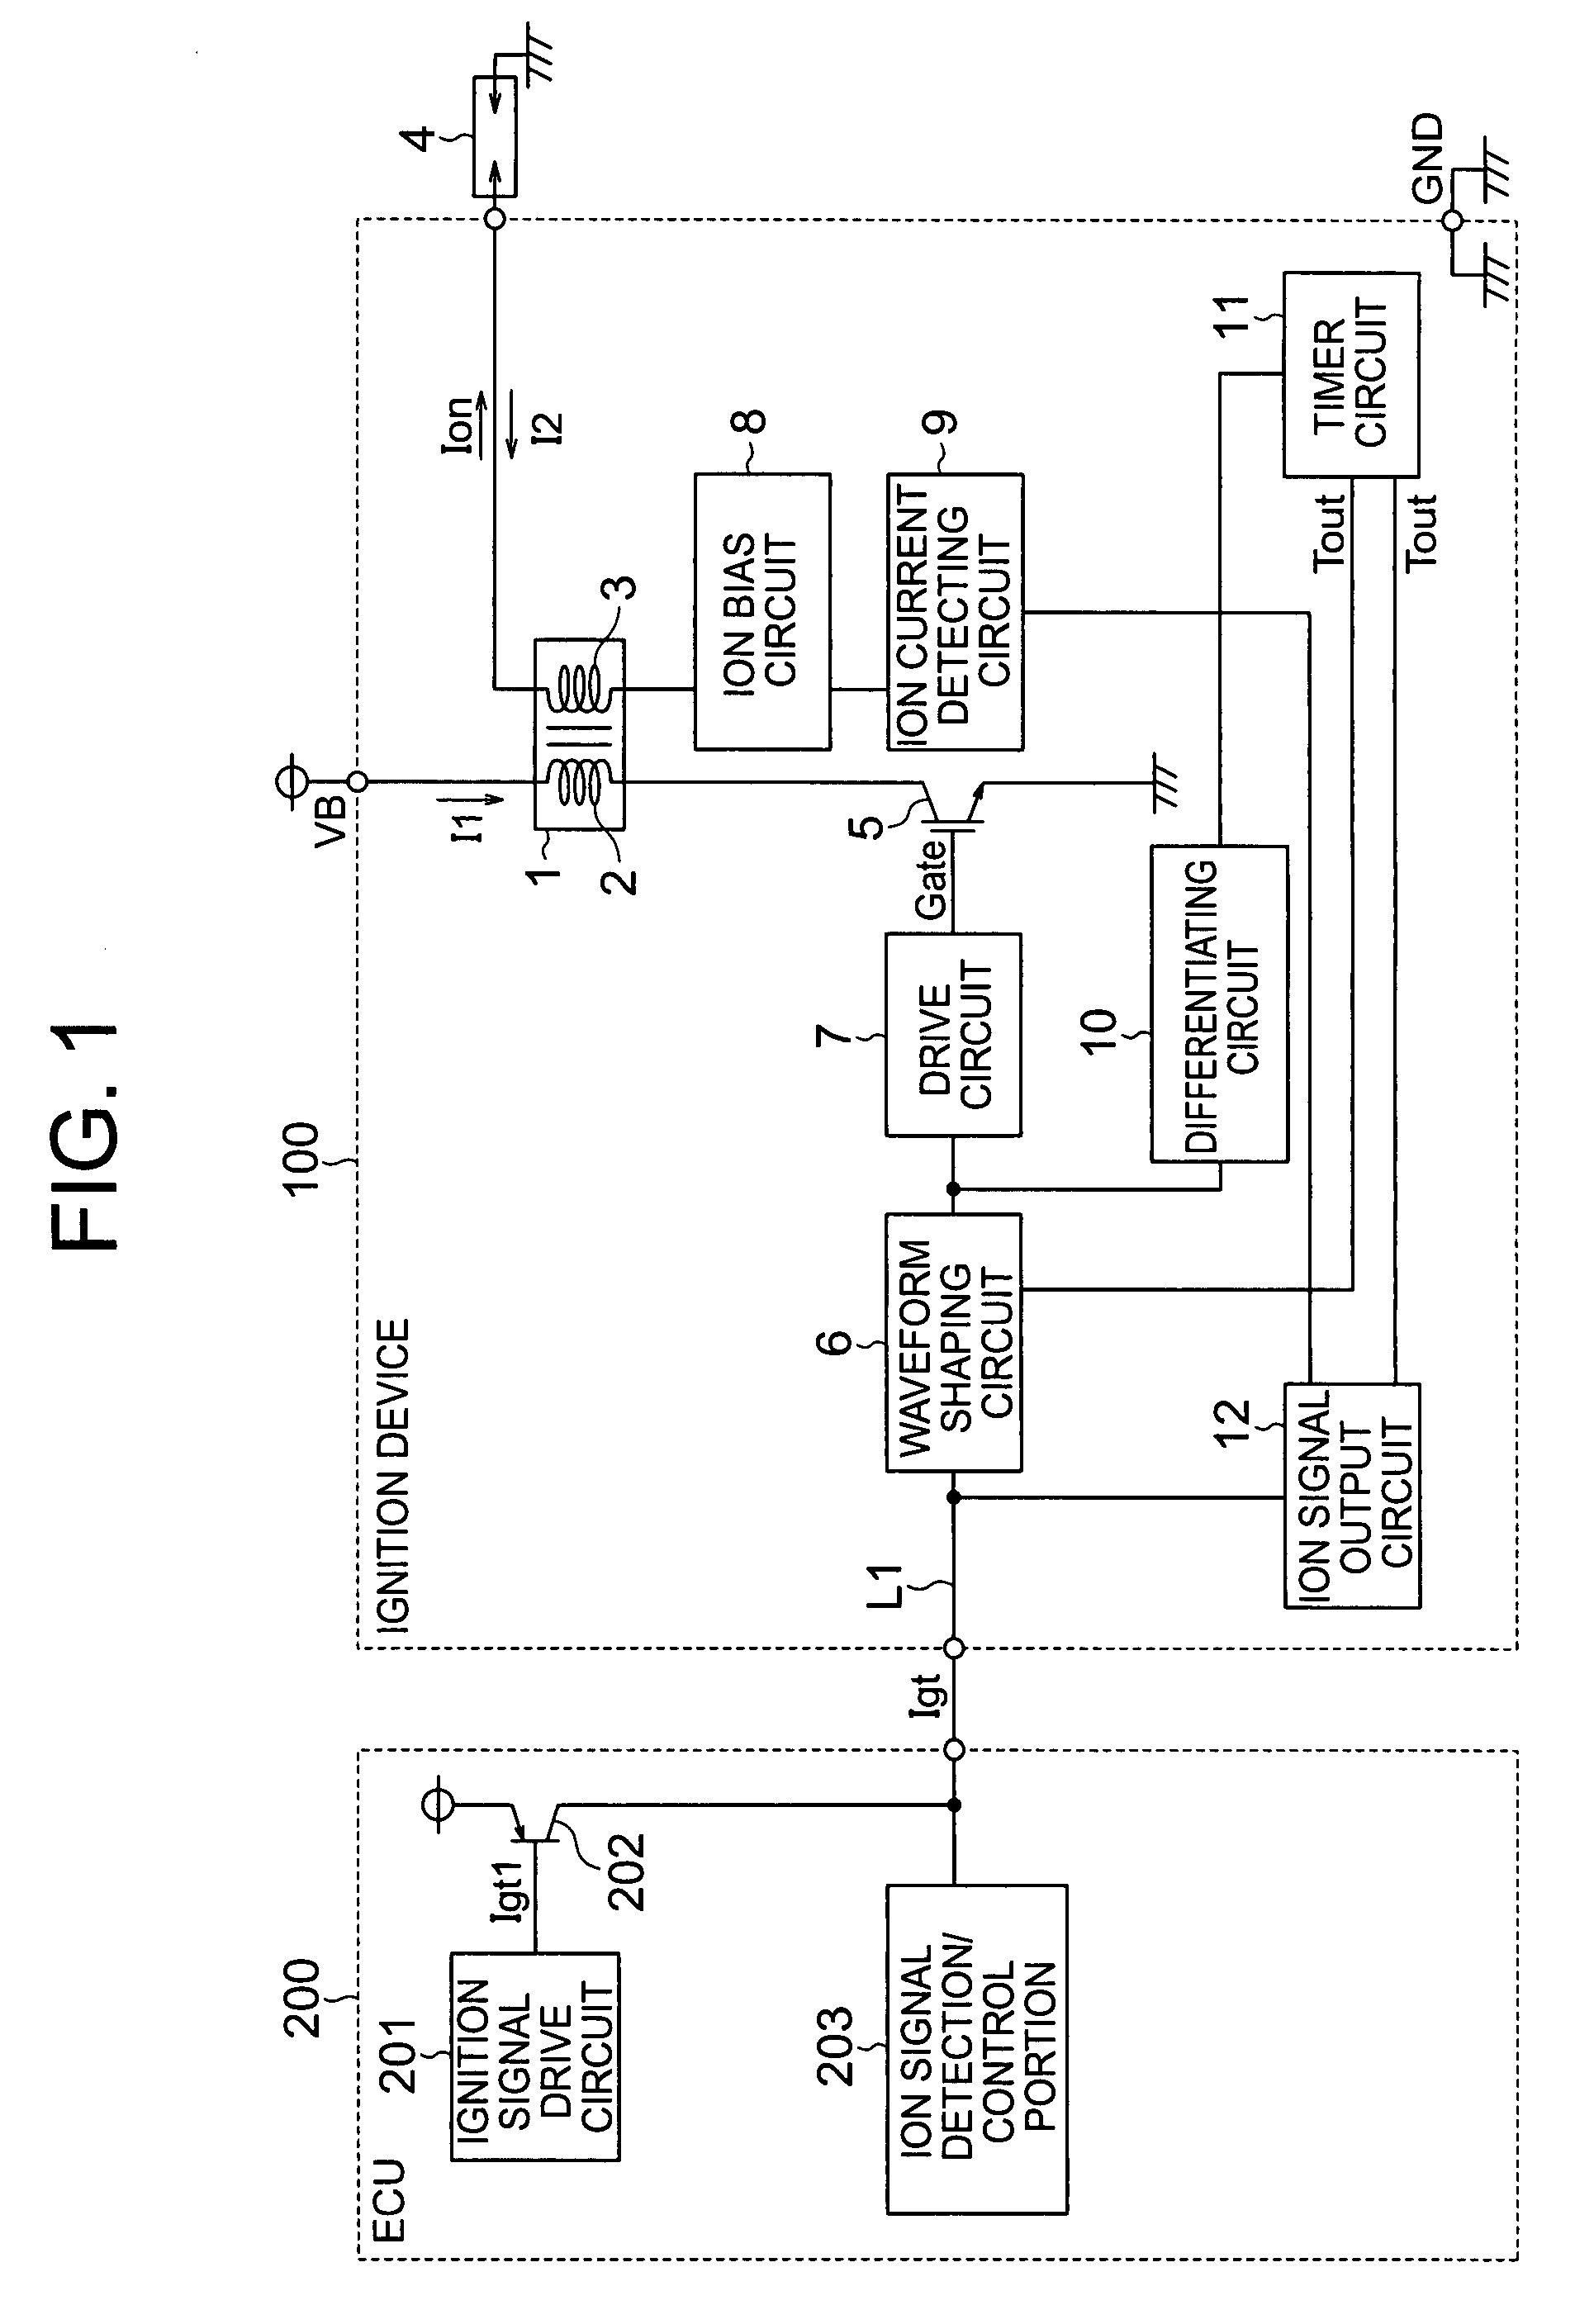 Ignition device of ignition control system for an internal combustion engine